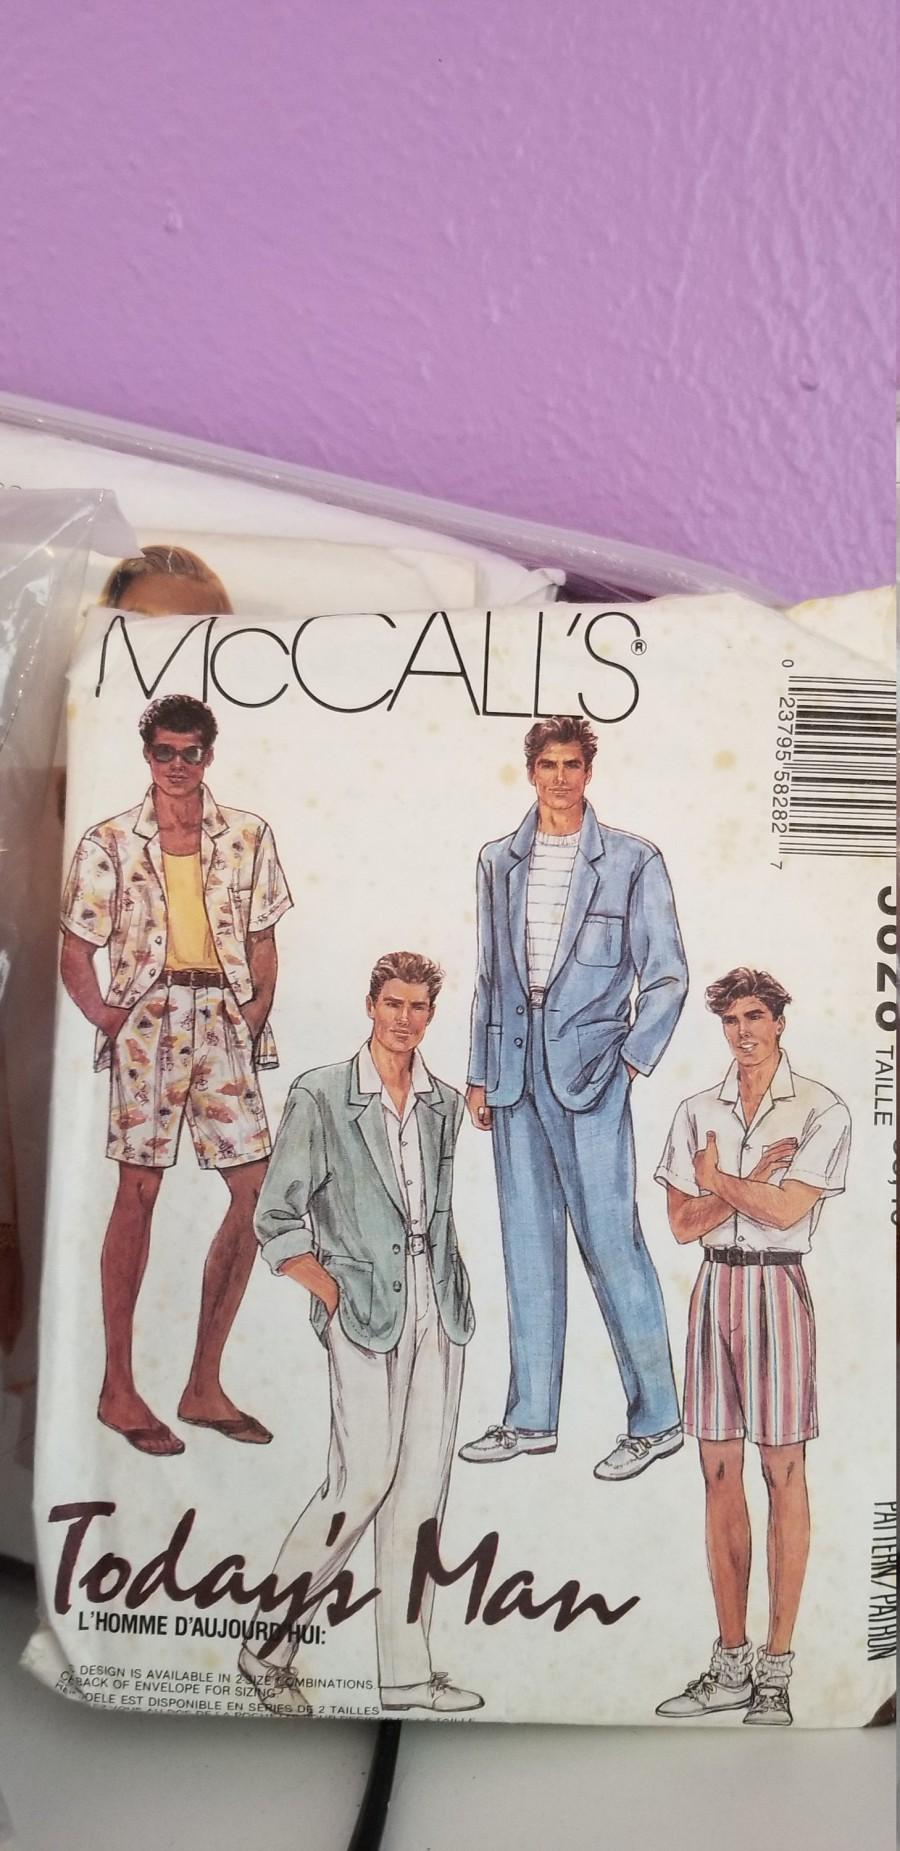 Wedding - McCalls mens unlined jacket shirt and pants or shorts sizes 38 to 40 some precut pieces